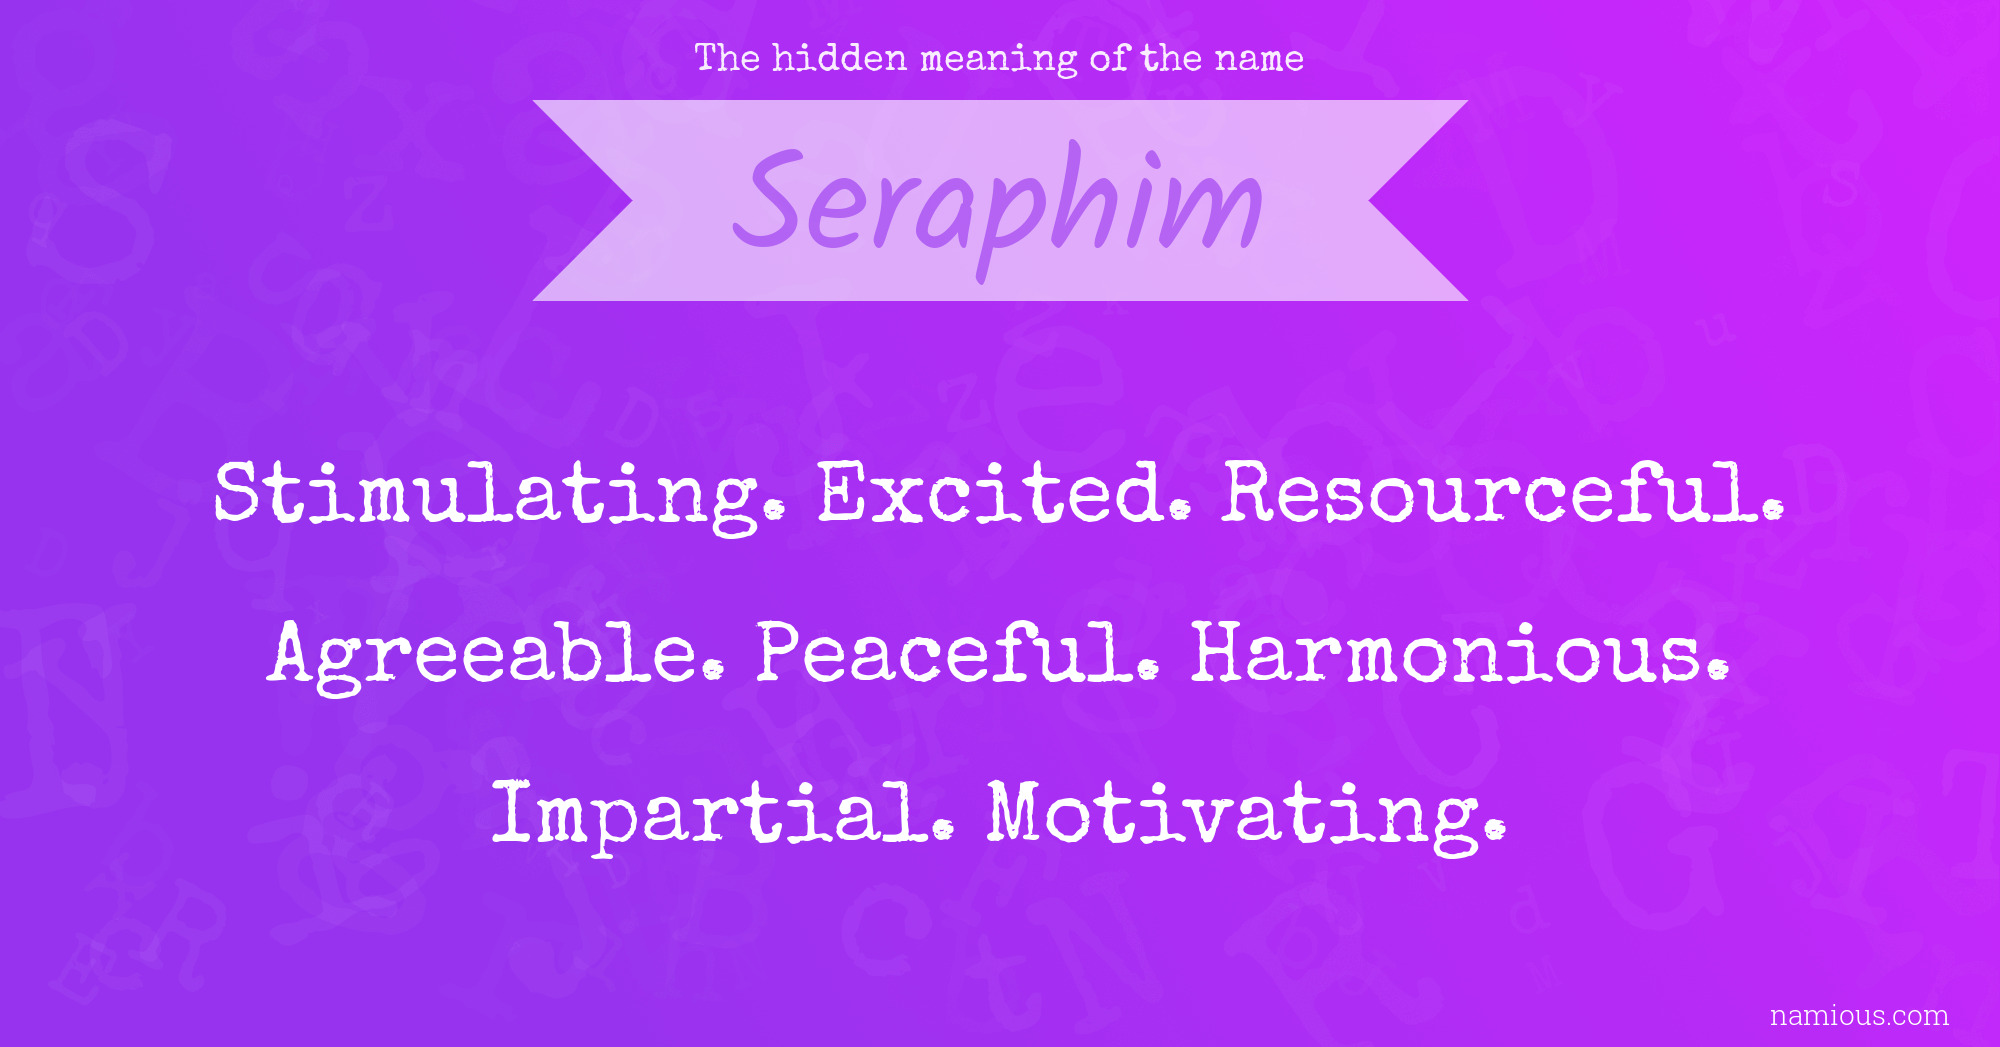 The hidden meaning of the name Seraphim